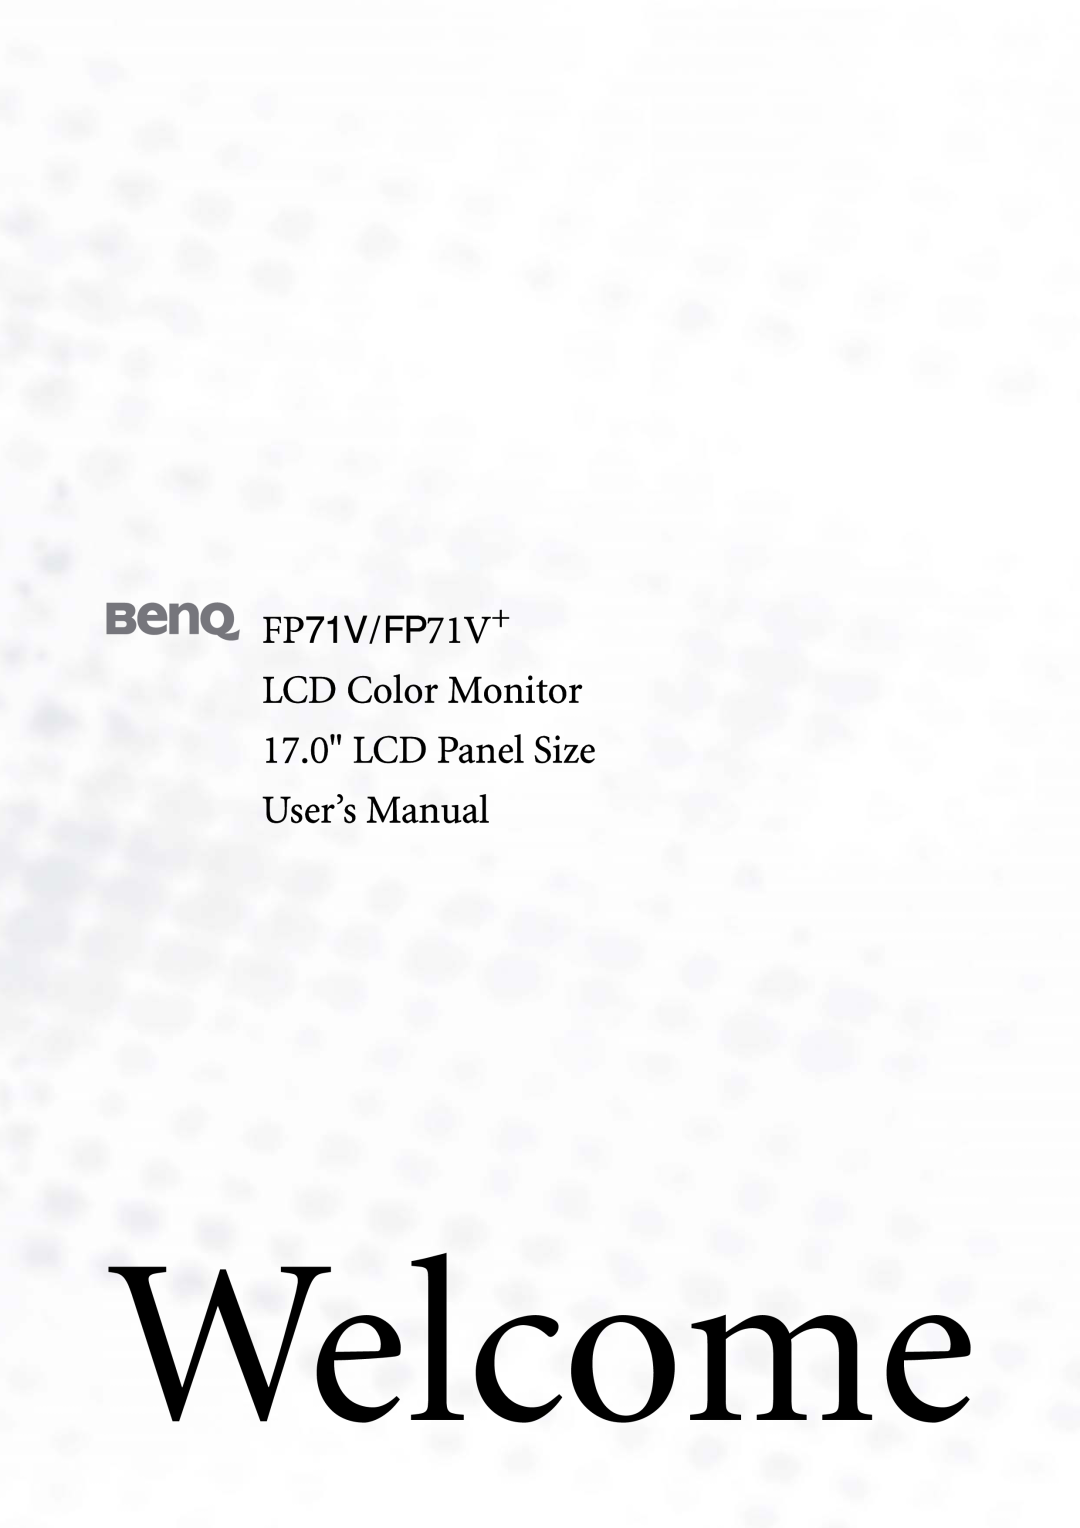 BenQ user manual Welcome, FP71V/FP71V+ LCD Color Monitor 17.0 LCD Panel Size User’s Manual 